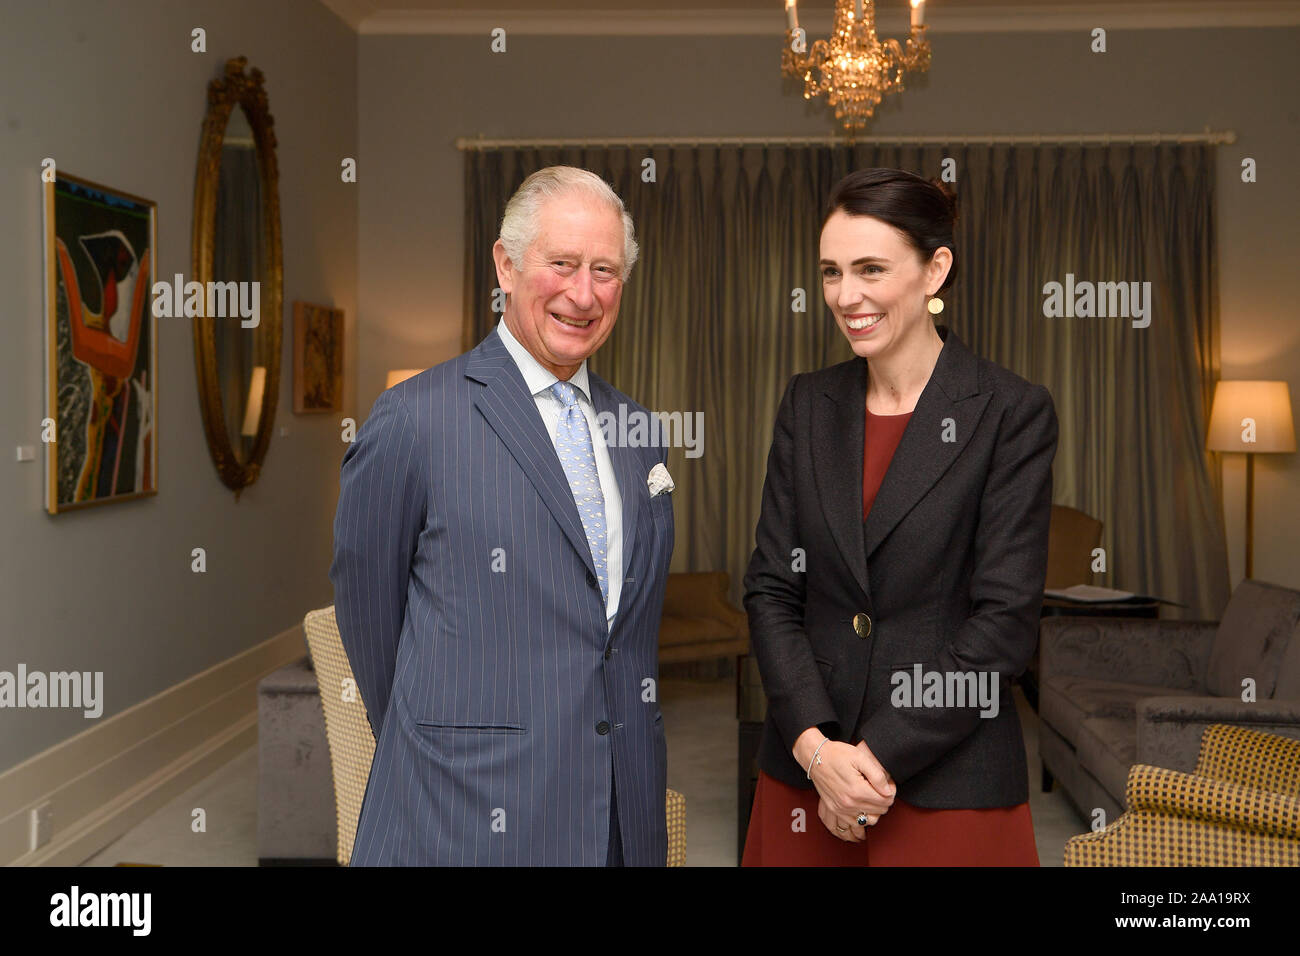 the-prince-of-wales-meets-with-the-prime